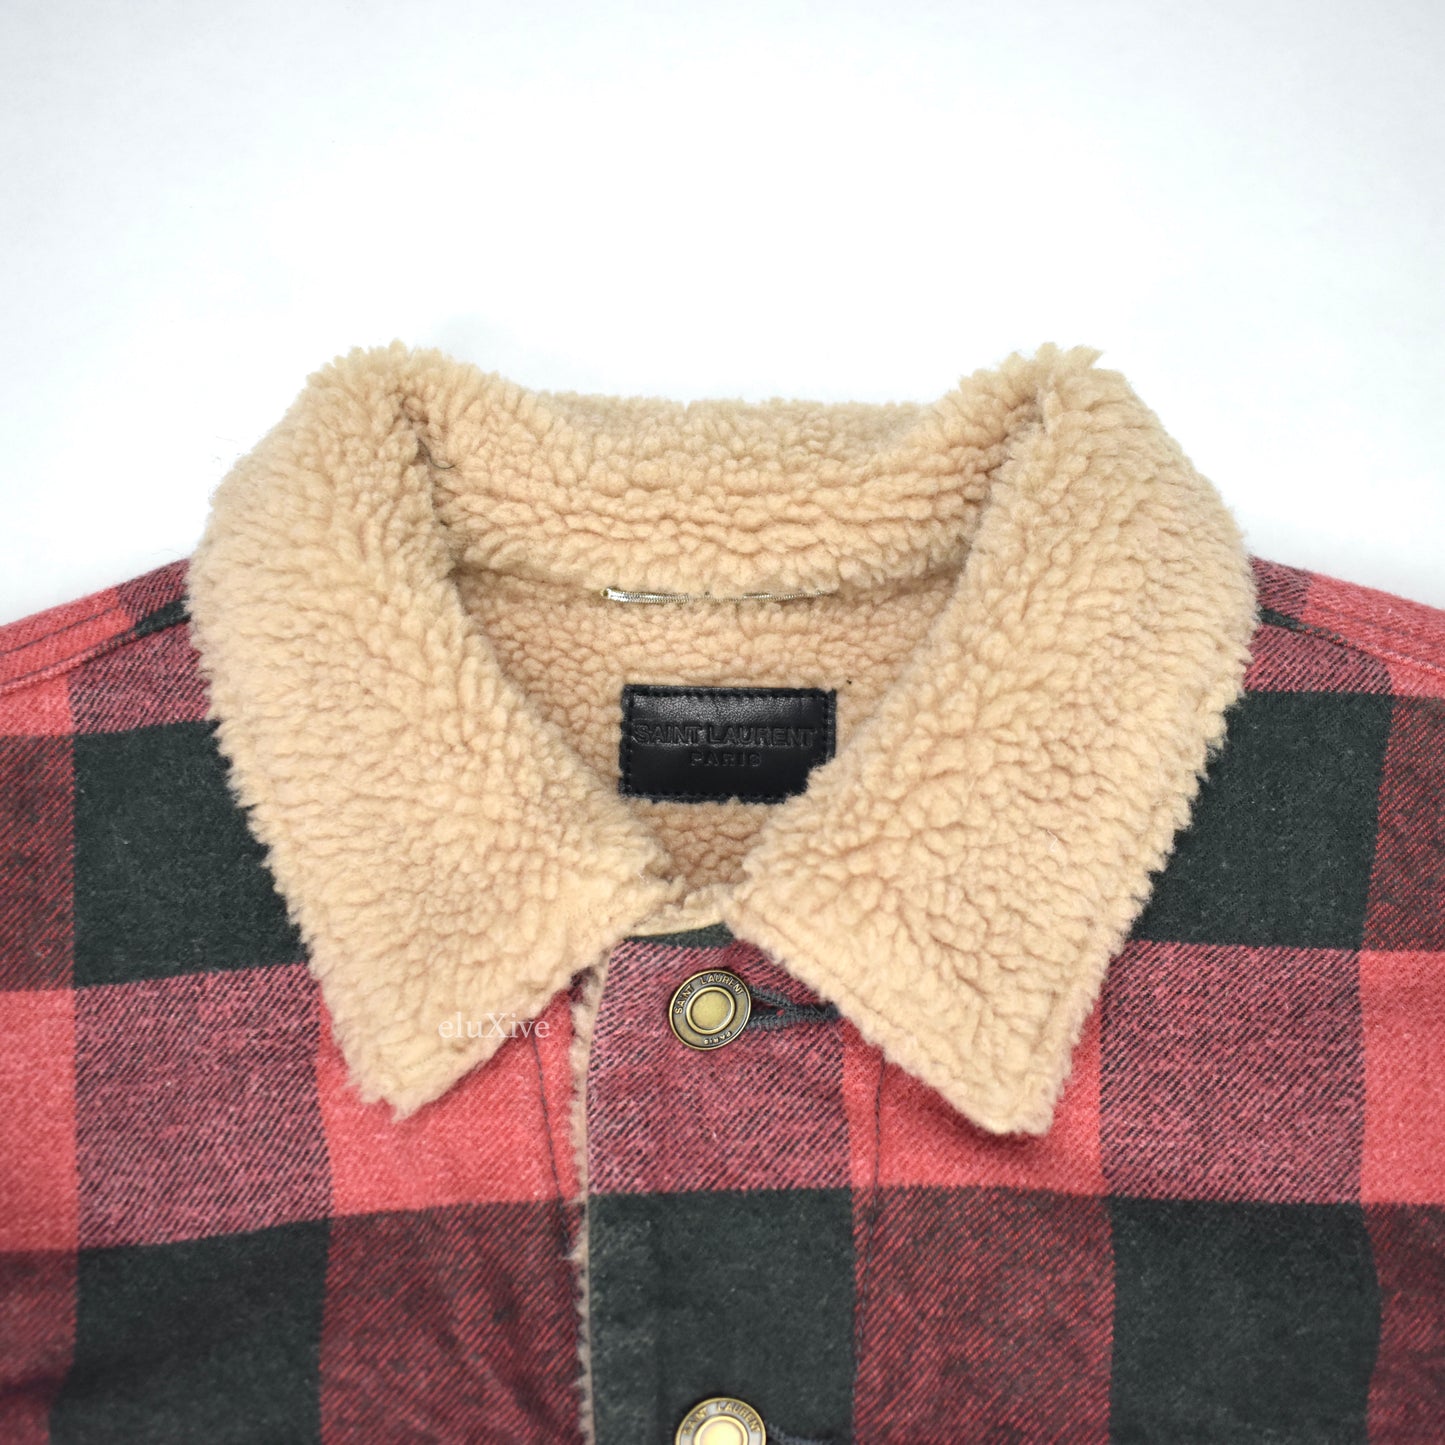 Saint Laurent - Red Plaid Shearling Lined Trucker Jacket